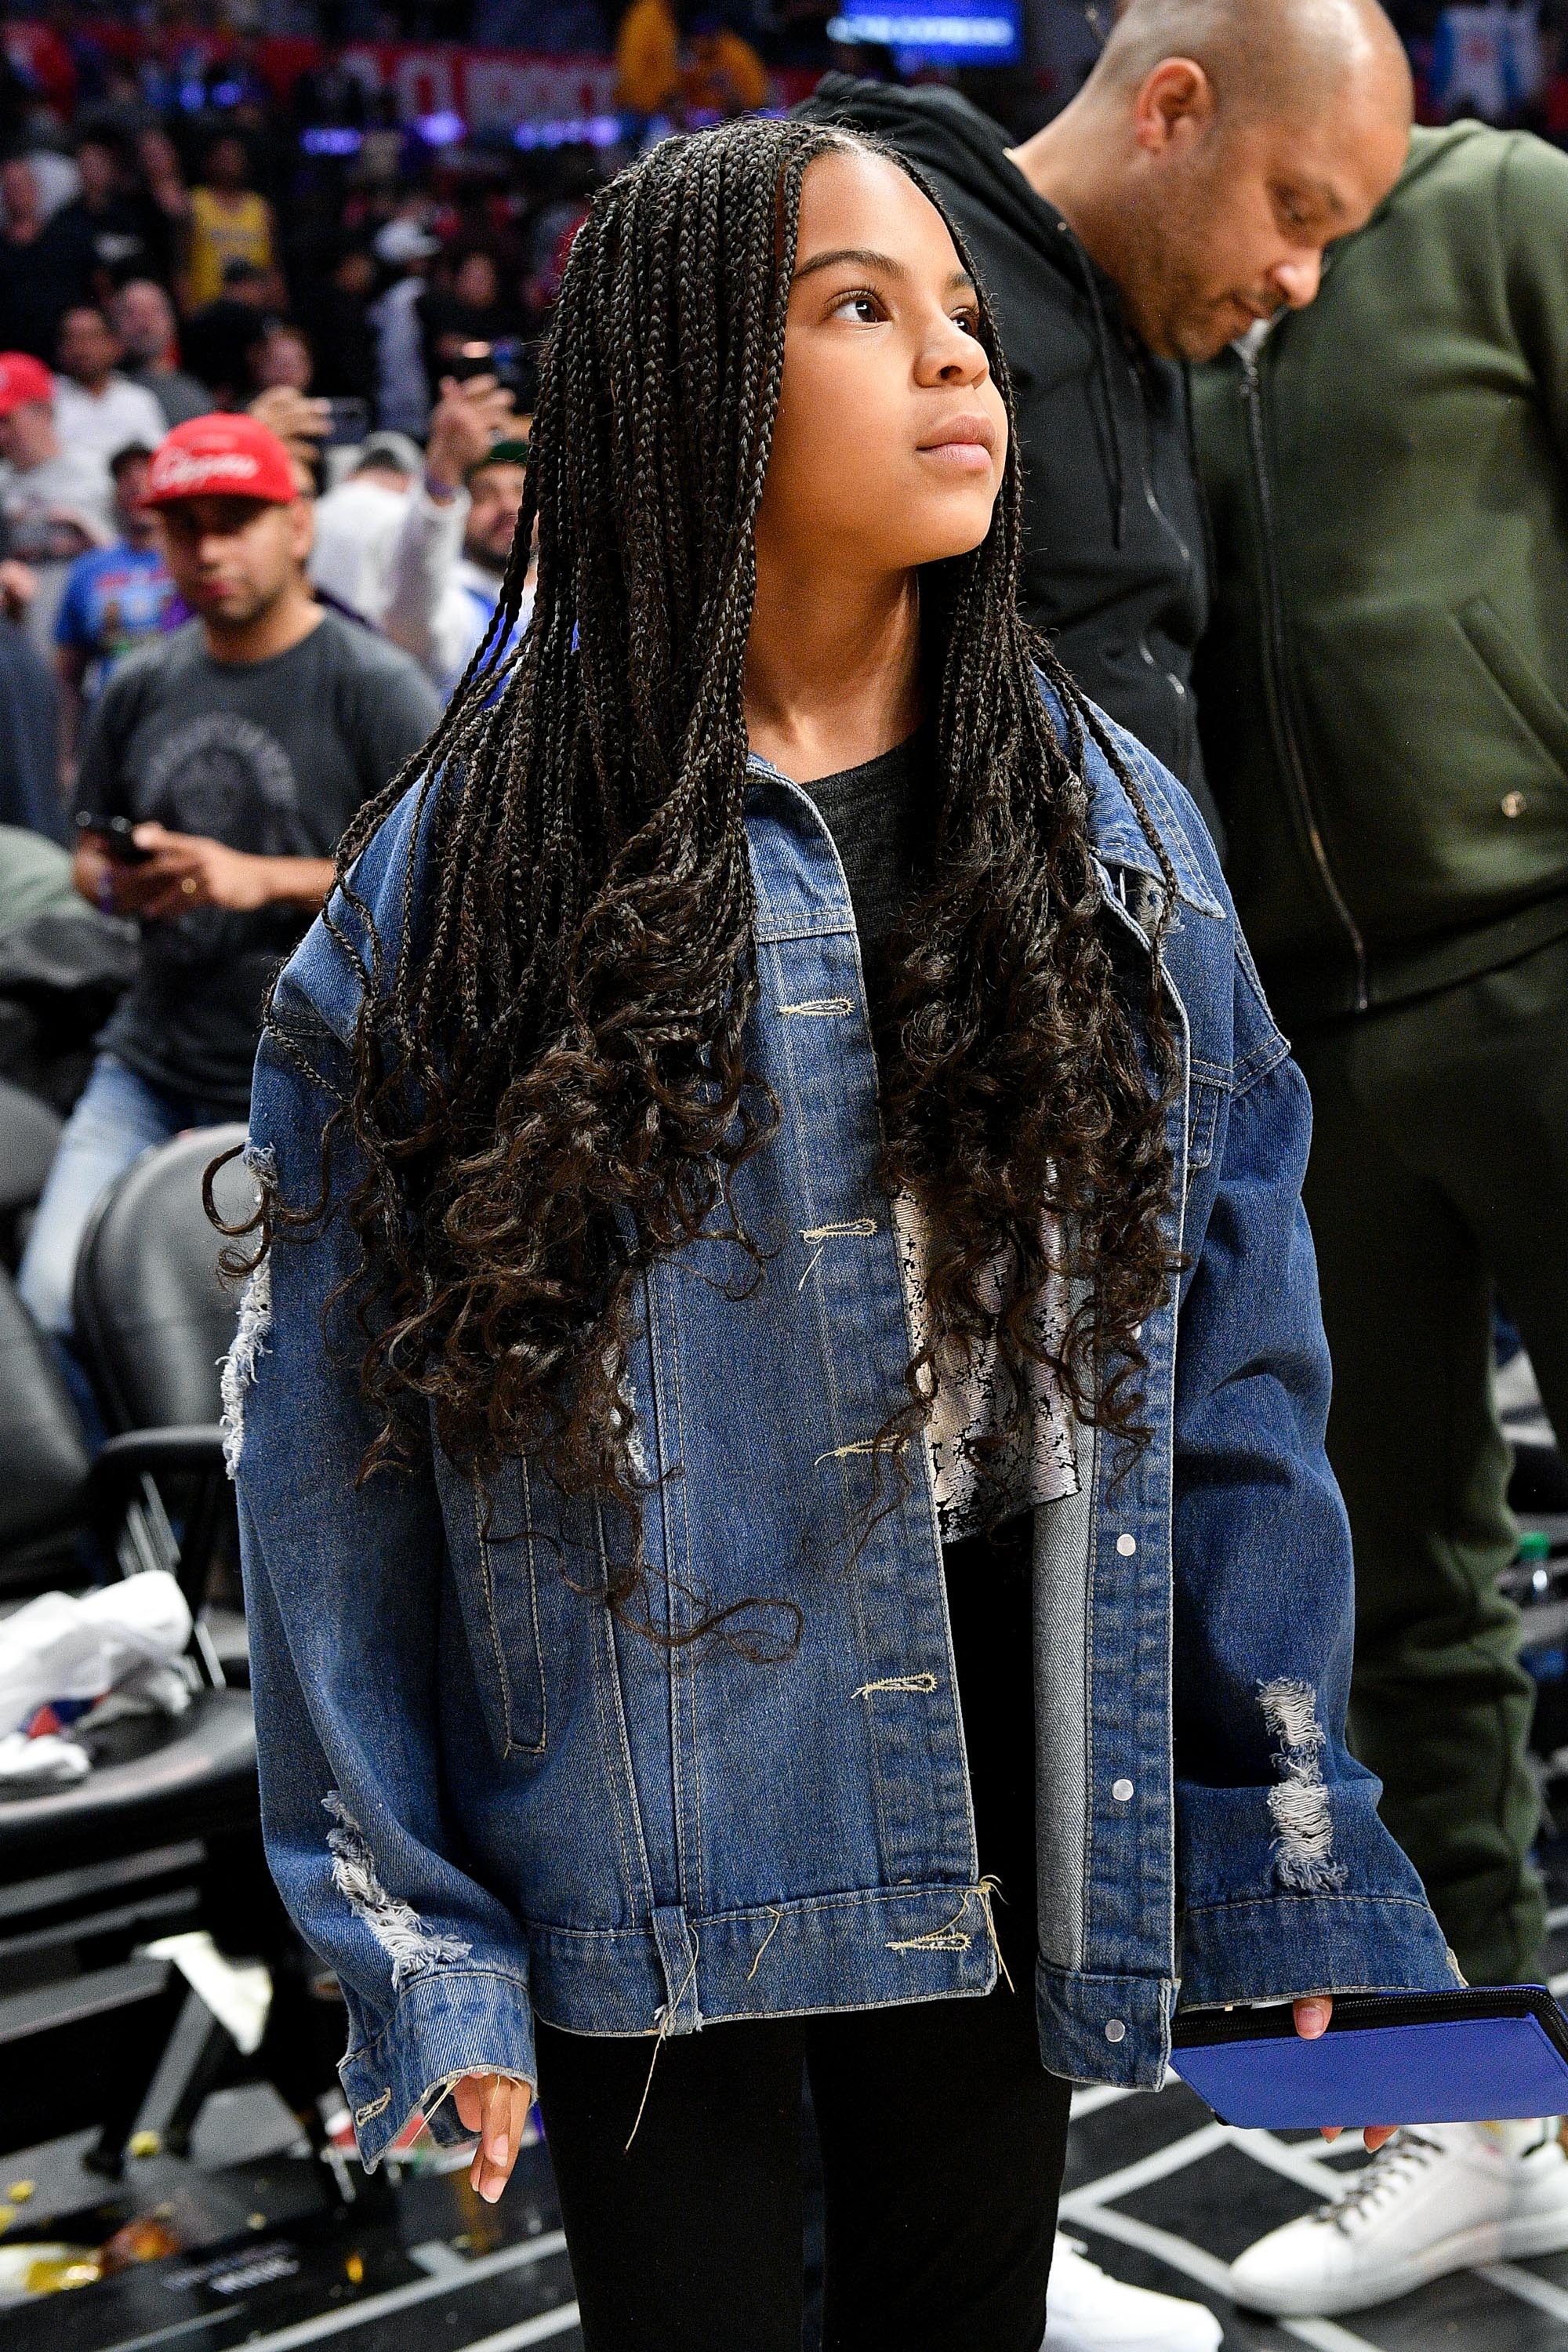 Blue Ivy Carter attends a basketball game between the Los Angeles Clippers and the Los Angeles Lakers at Staples Center on March 8, 2020, in Los Angeles, California. | Source: Getty Images